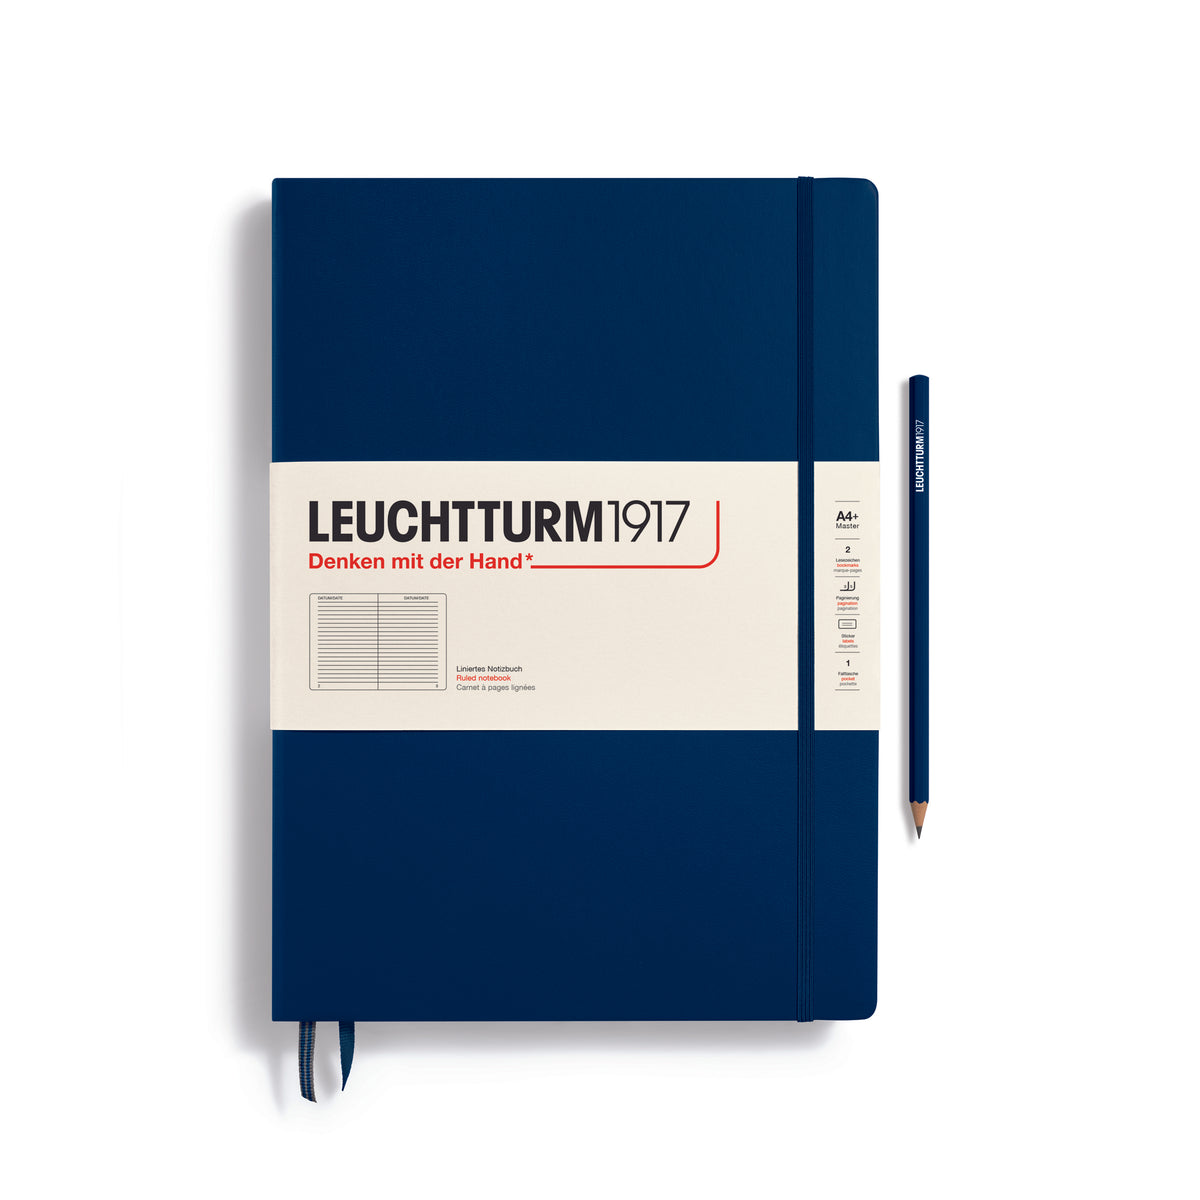 A large dark blue notebook with a white paper band around it with the logo of the brand Leuchtturm1917. Below this is an image of the page ruling inside - in this case, ruled or lined. It has two page marker ribbons showing at the bottom near the binding and a matching colour elastic notebook closure holding it neatly together. A dark blue Leuchtturm pencil is shown at the side of the book.